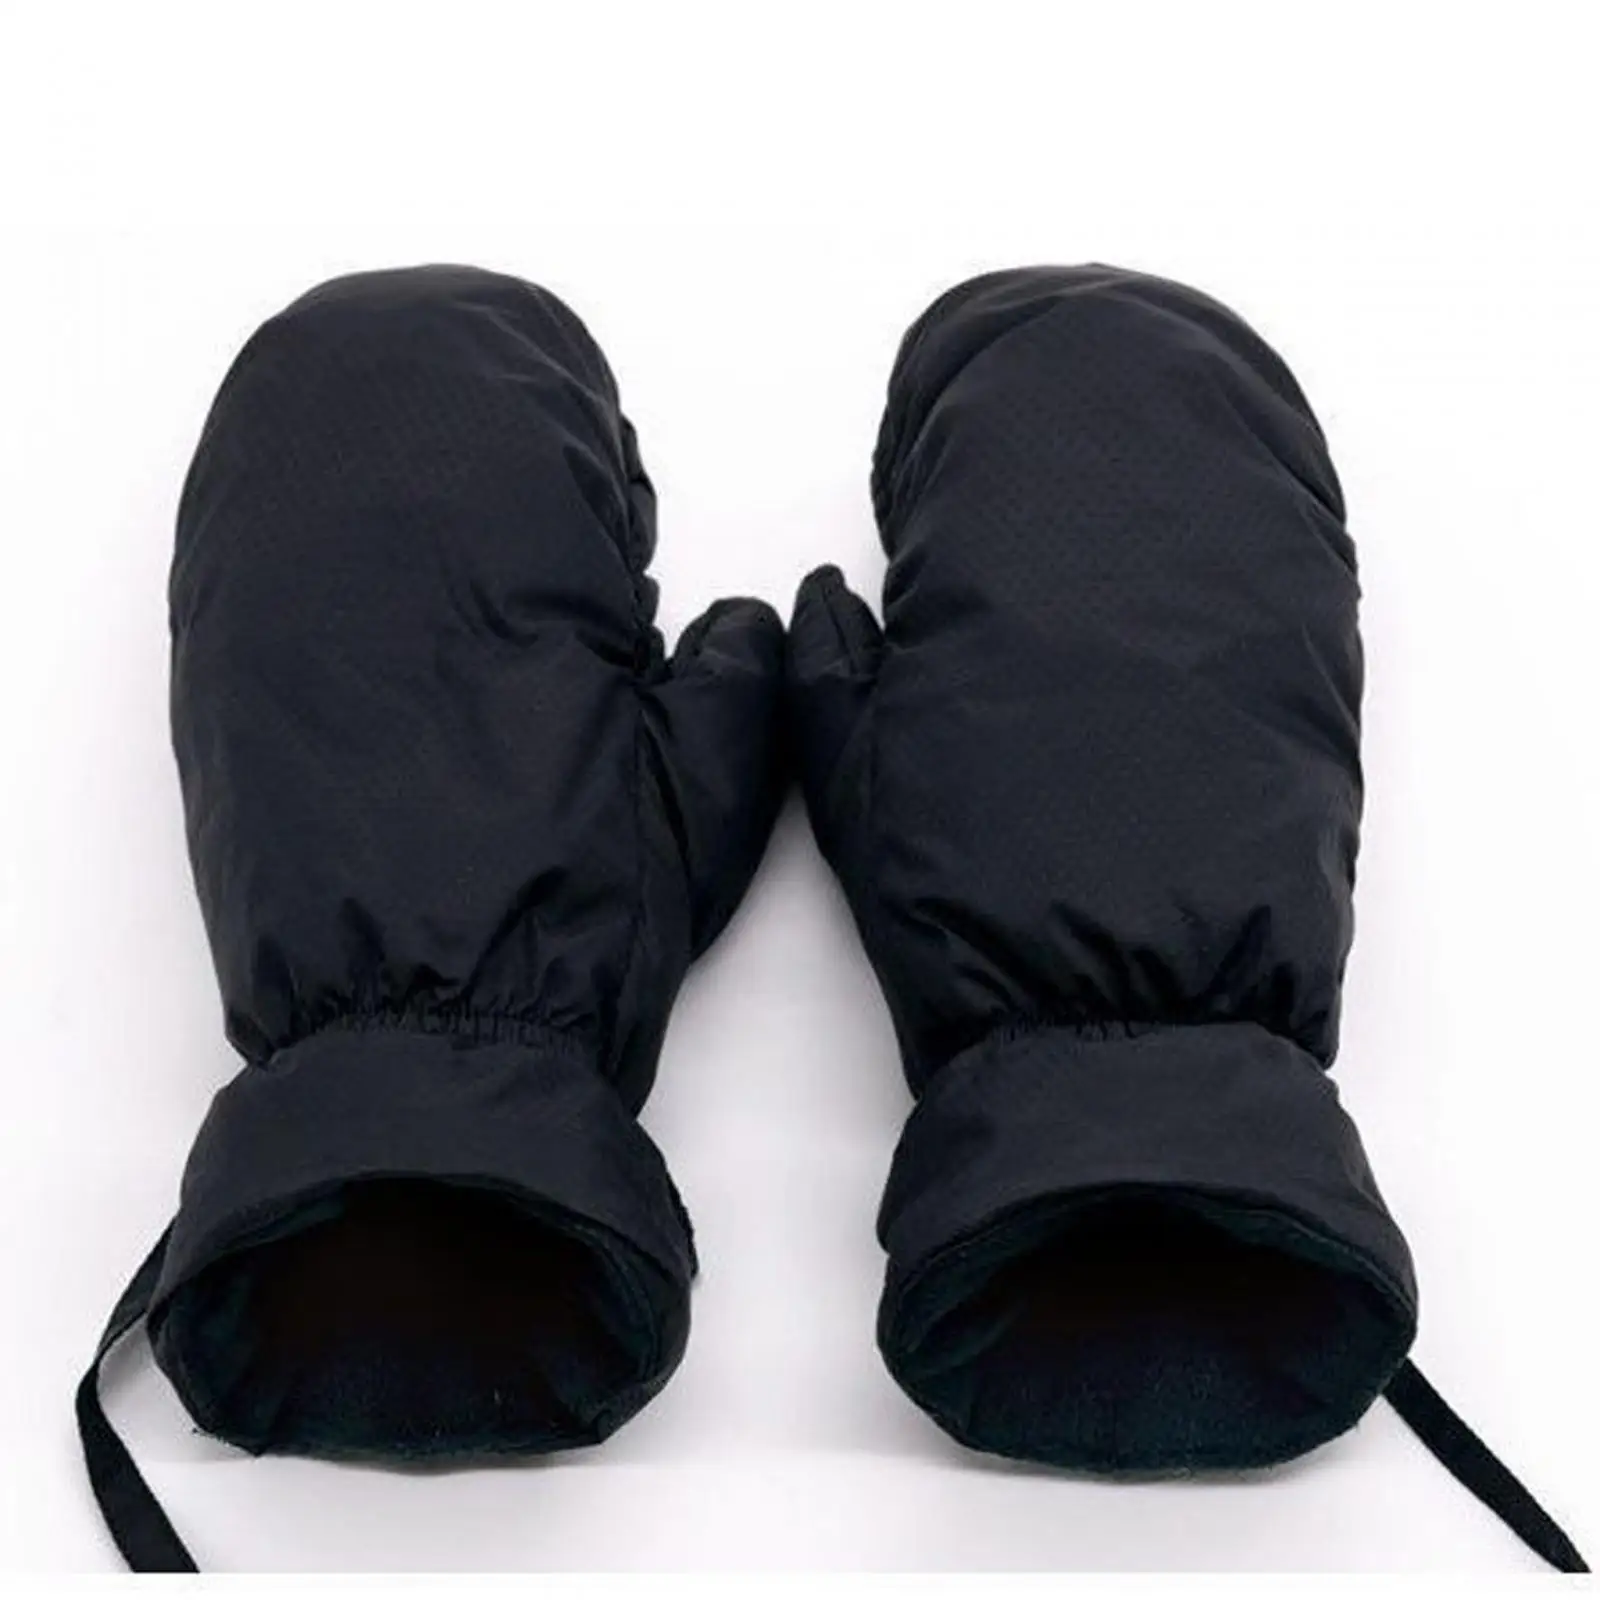 Down Mittens Windproof for Men Women Insulated Cold Weather Gloves for Riding